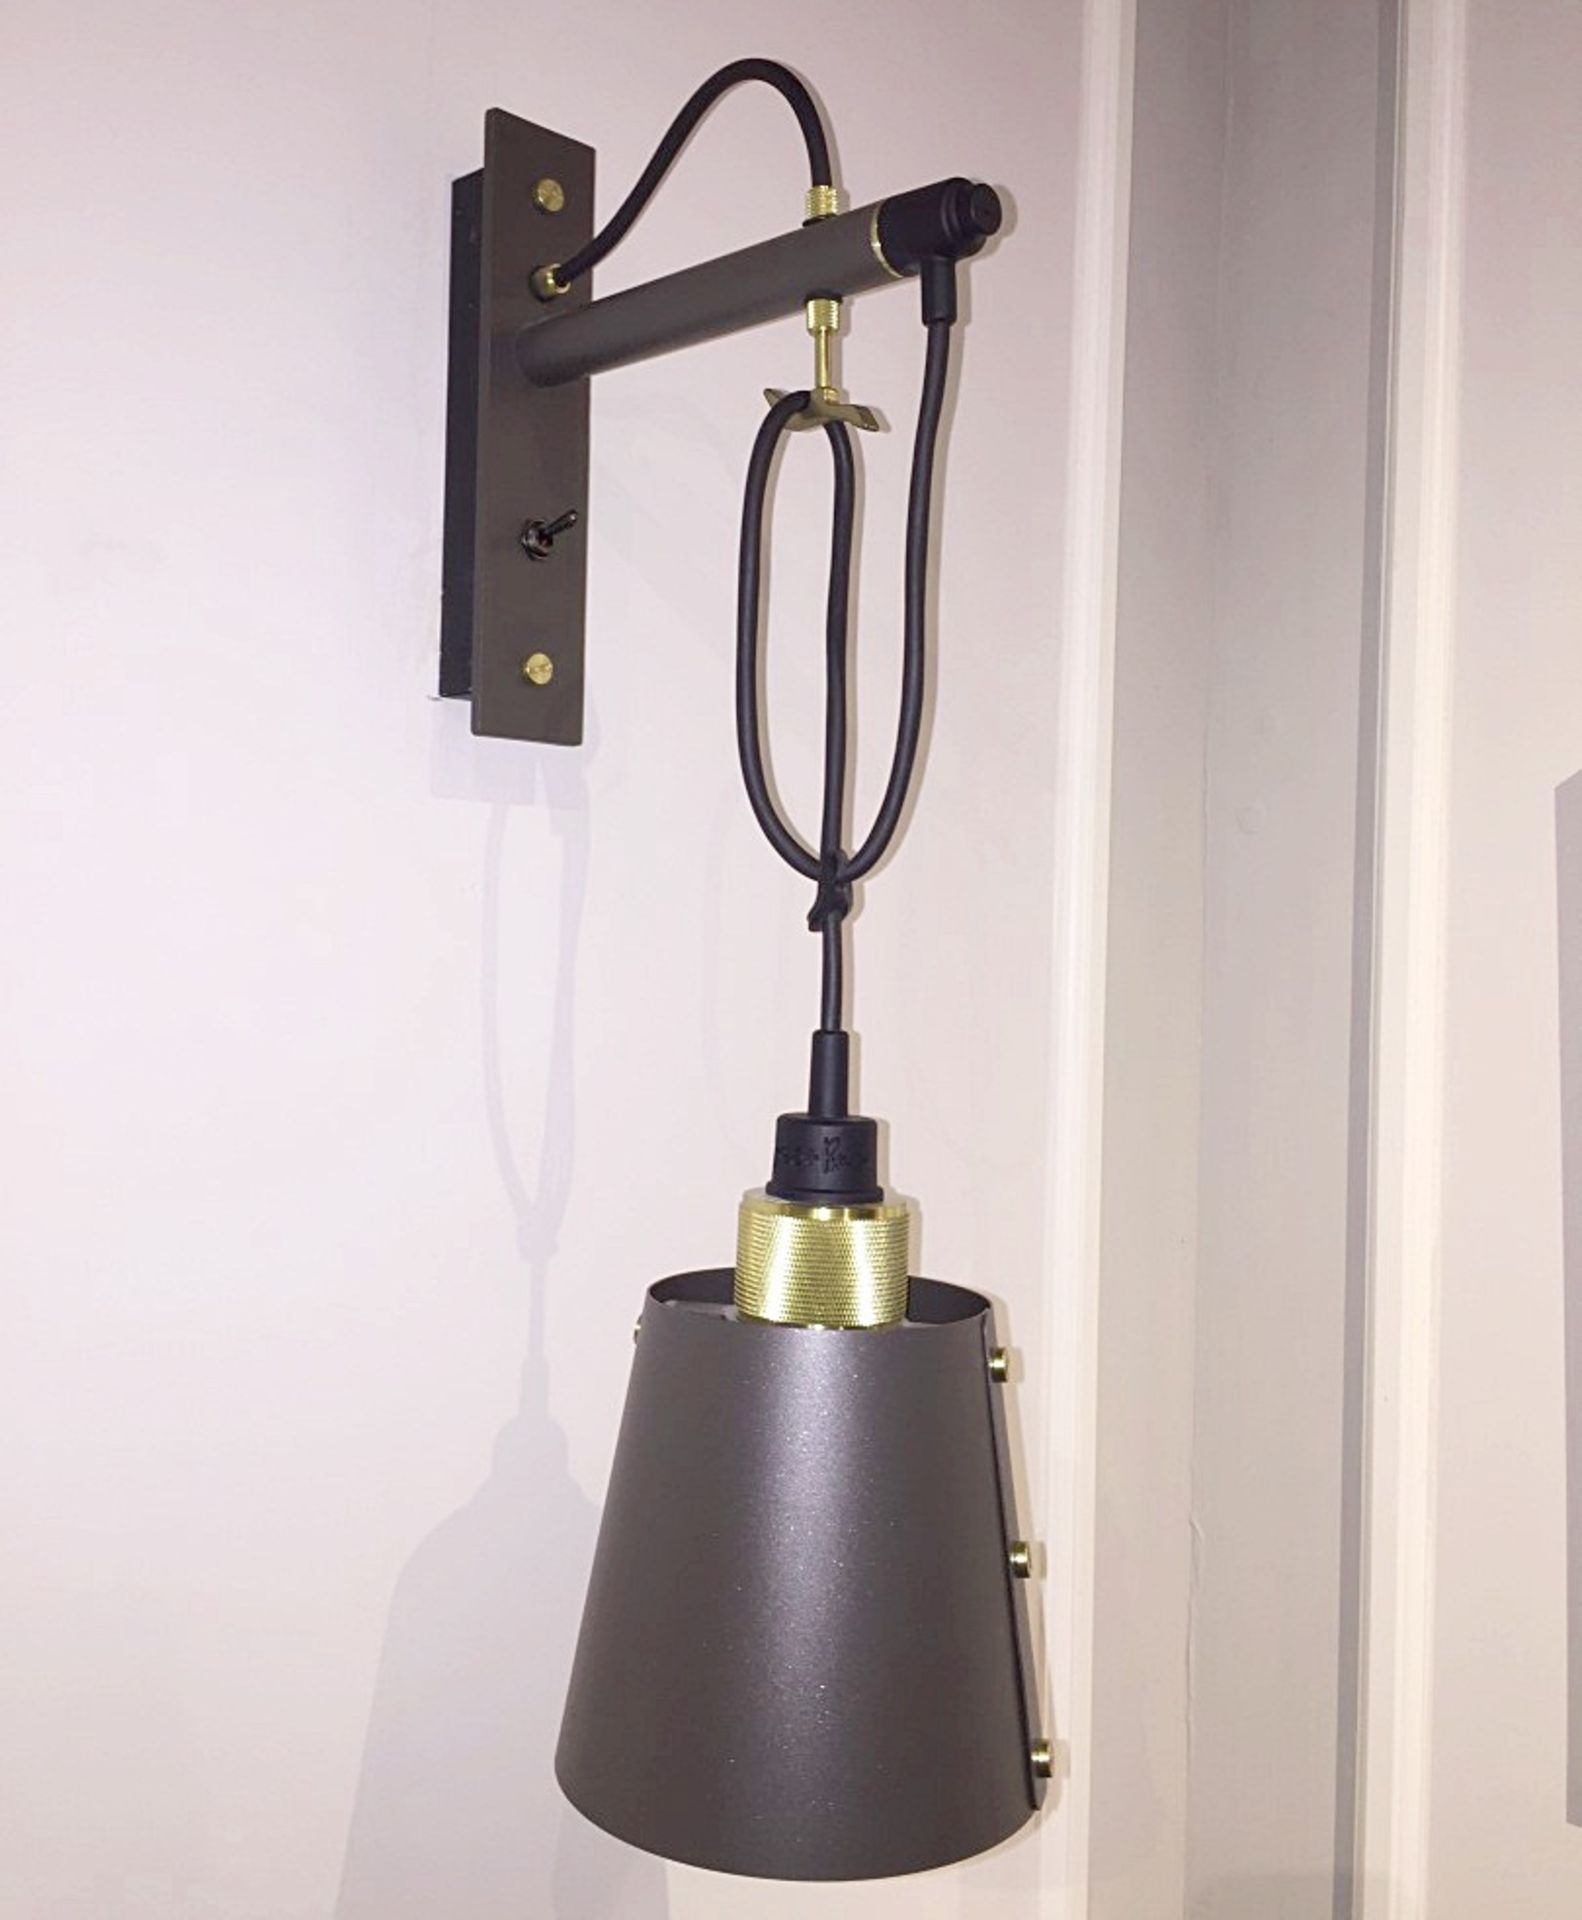 1 x BUSTER + PUNCH Hooked Wall Light With Metal Shade - Ref: WS/FF160B - CL204 - Location: London Ci - Image 2 of 11